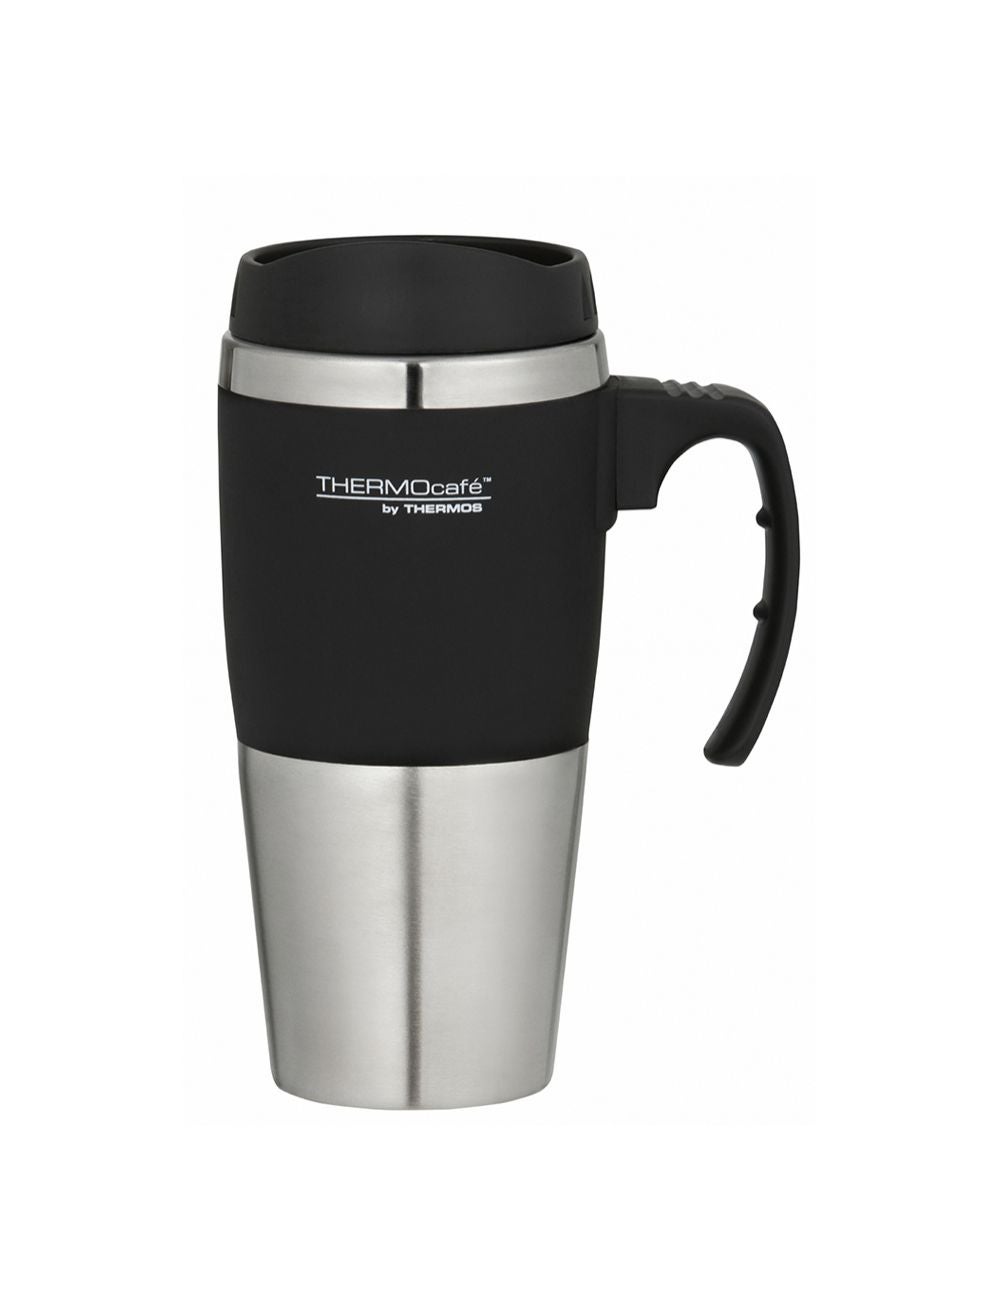 Thermos Premium Double Wall Thermal Travel Mug No Handle (St/St)